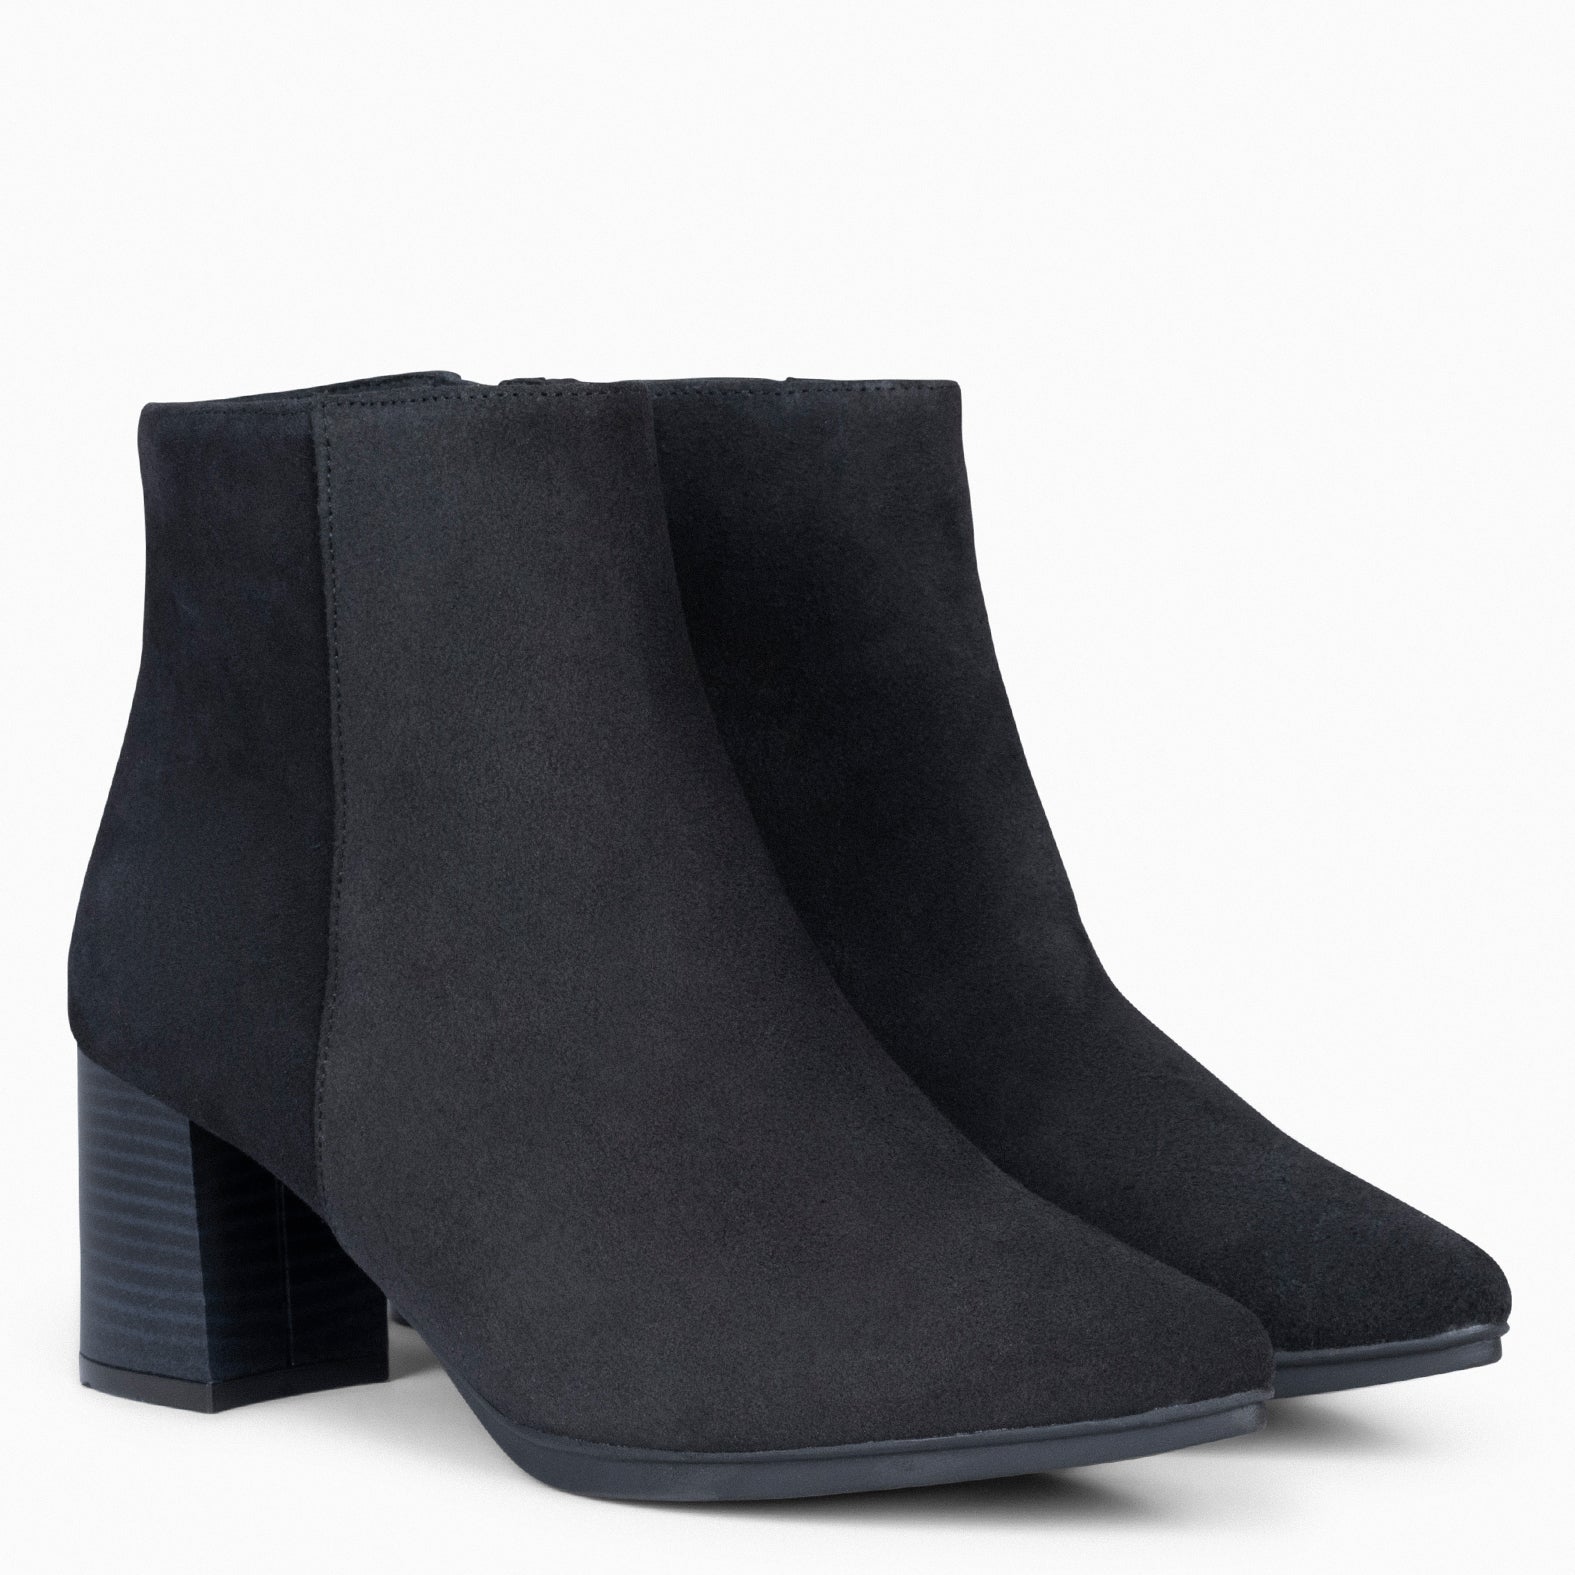 CITY - BLACK suede leather wide heel ankle boots 